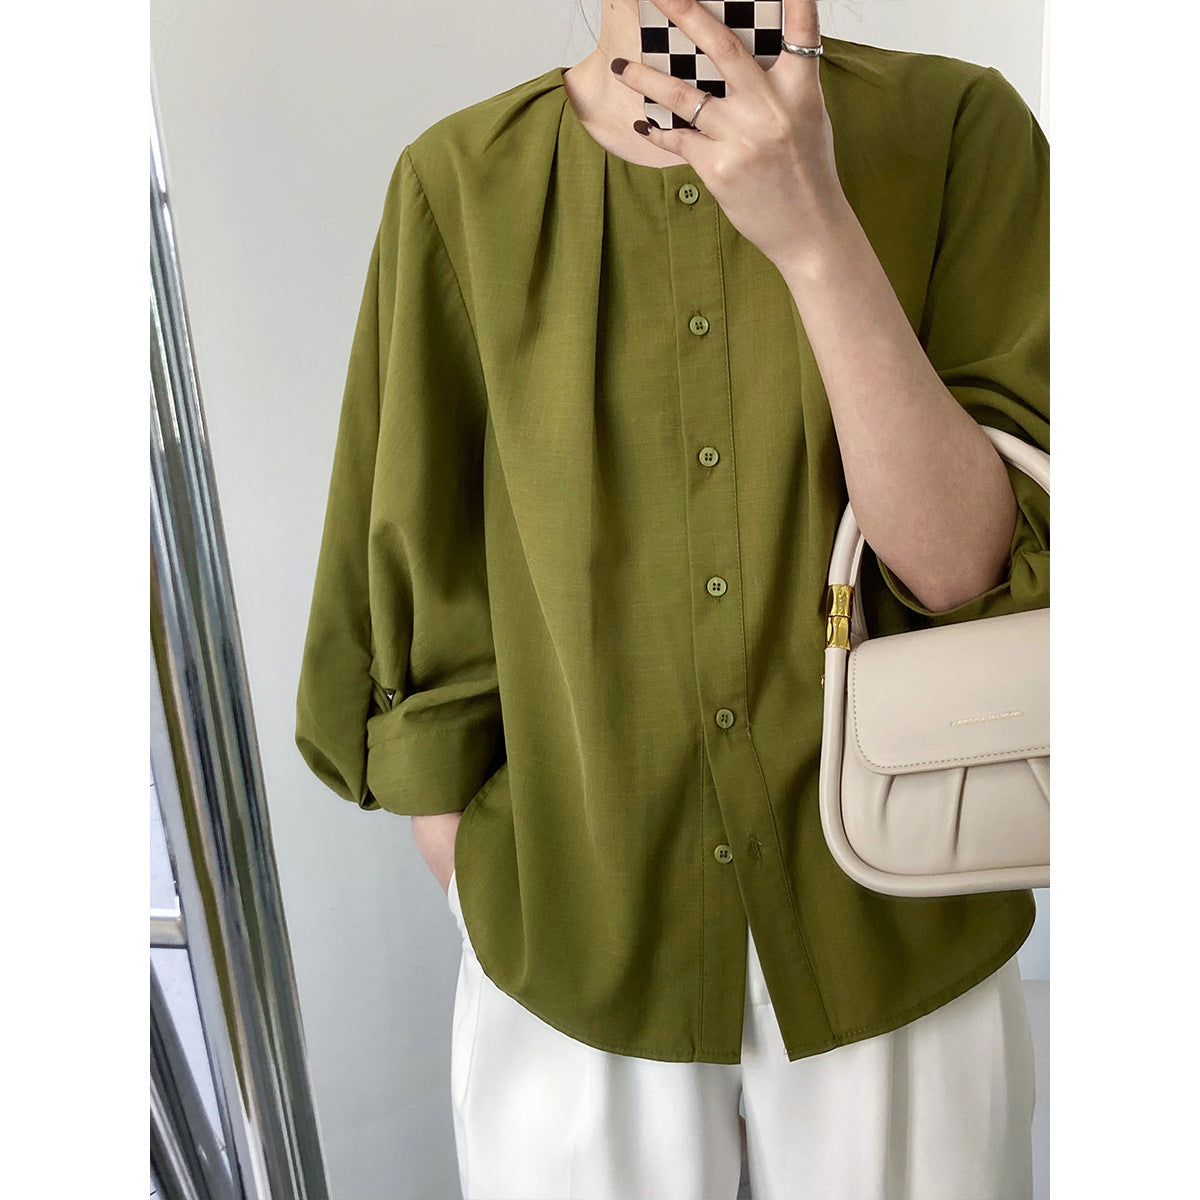 Designed Linen 3/4 Length Sleeves Shirts-Shirts & Tops-Green-M-Free Shipping Leatheretro